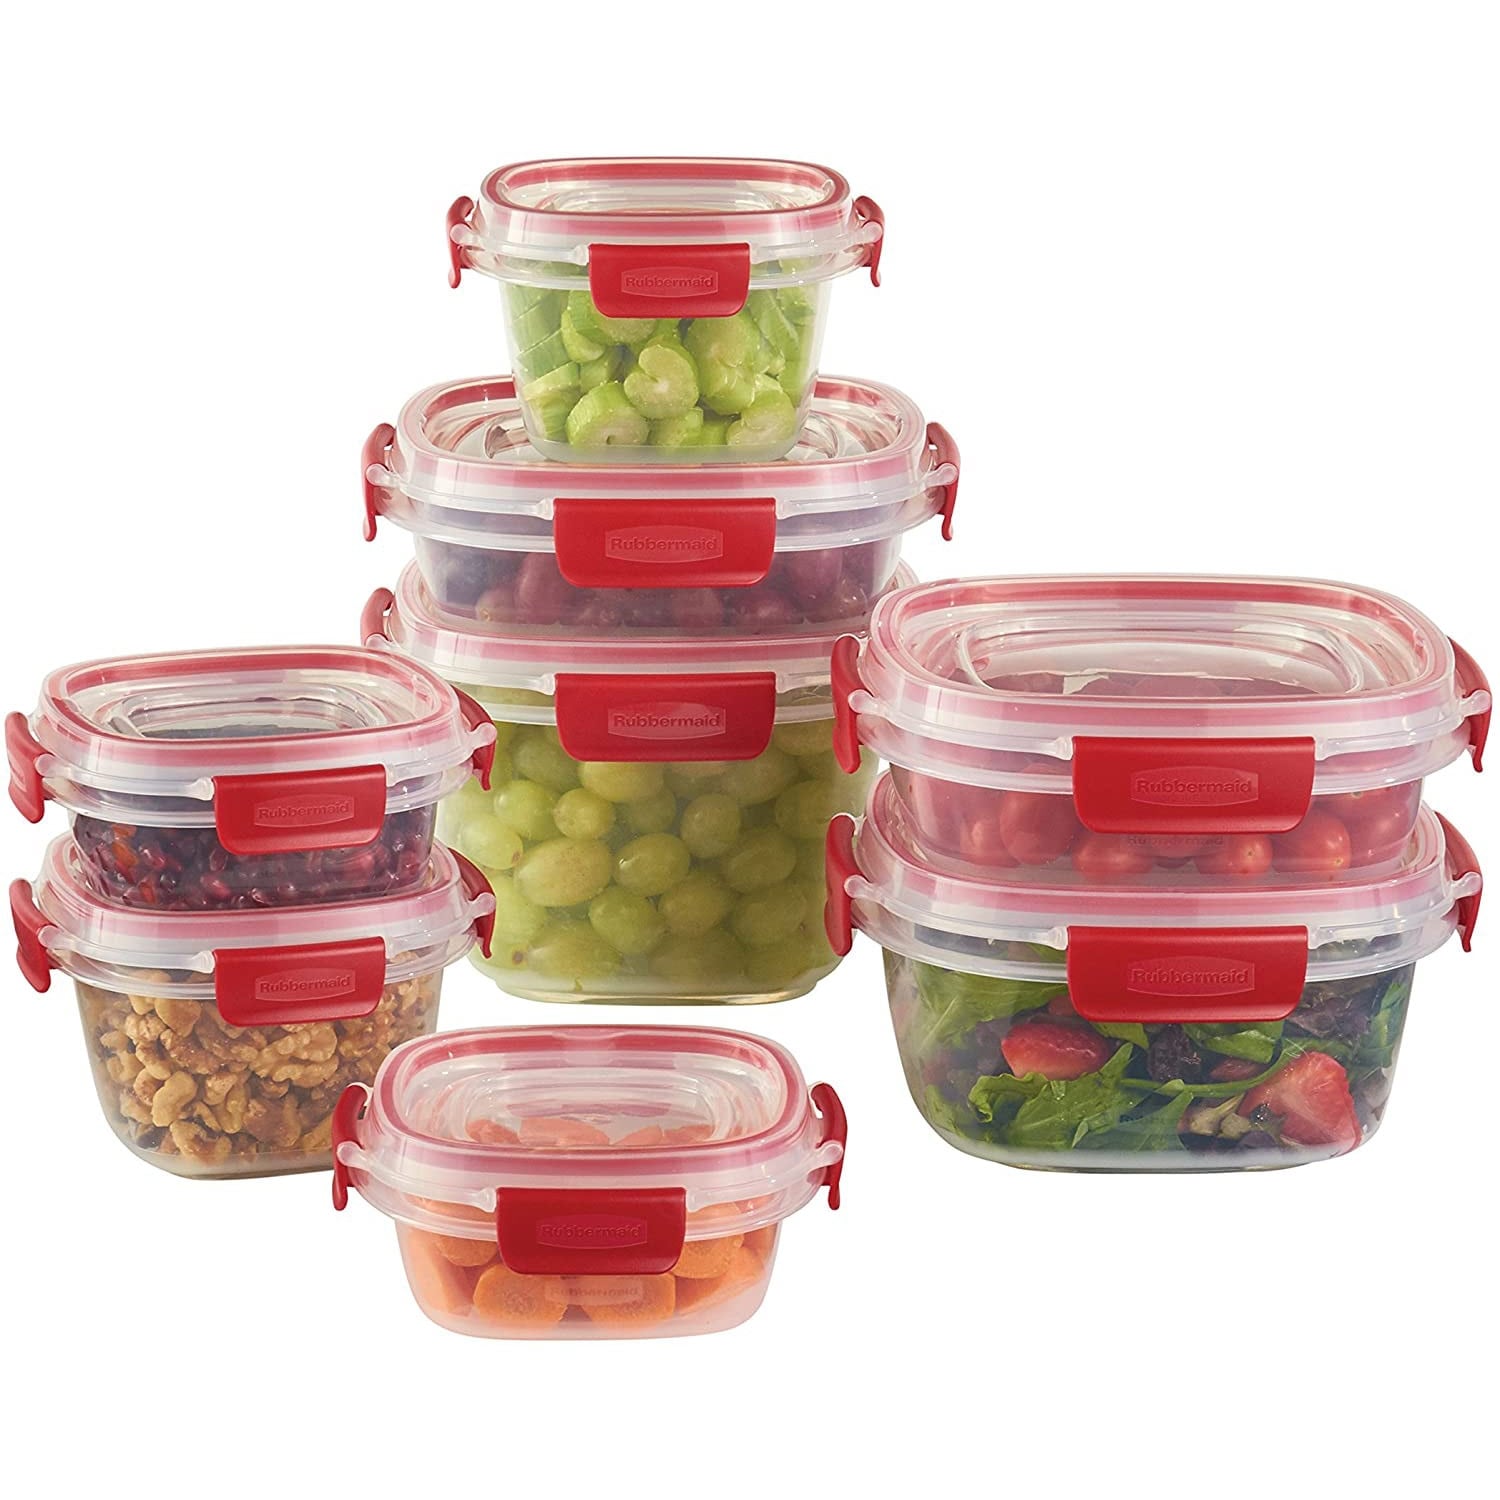 https://ak1.ostkcdn.com/images/products/is/images/direct/2ed3cc20b0aca3cc30b96ff1f10291c90f0f8596/Rubbermaid-Easy-Find-Lids-Tabs-Food-Storage-Container%2C-16-Piece-Set%2C-Clear-with-Red-Tabs.jpg